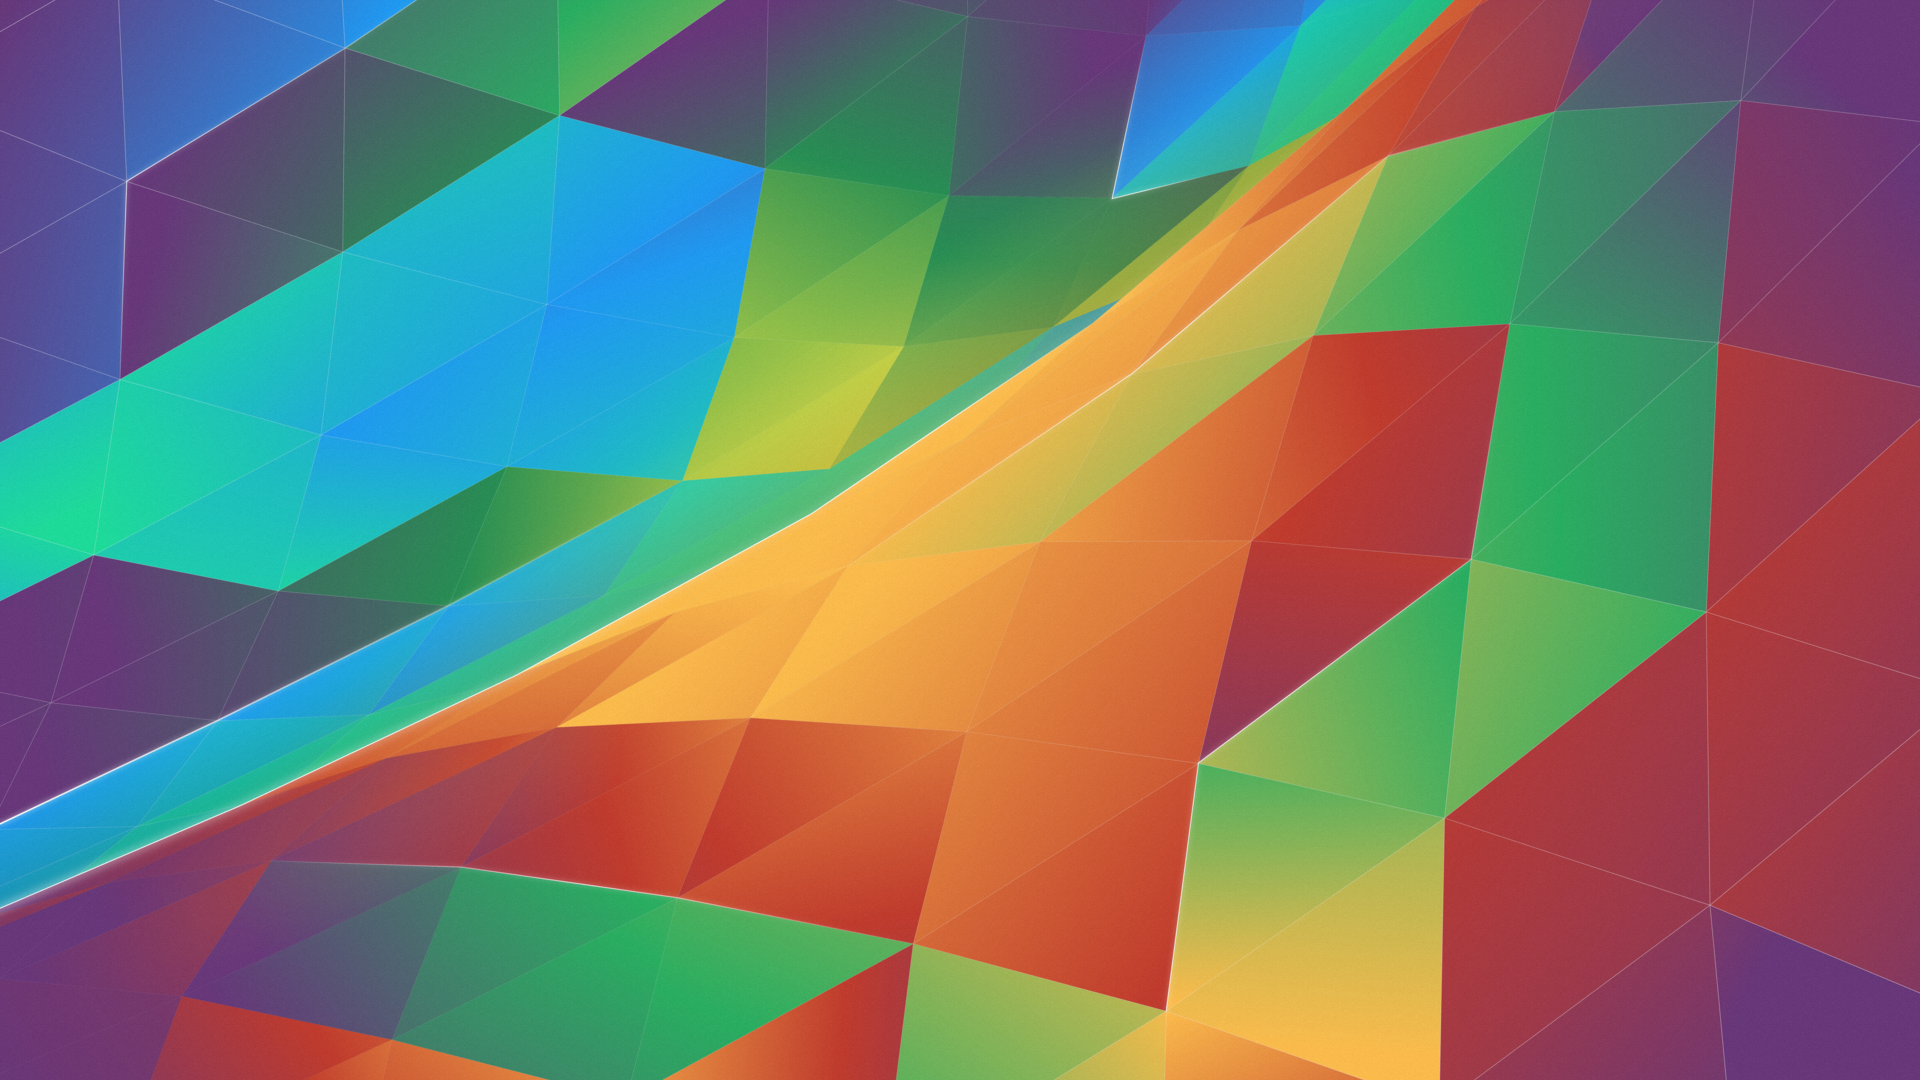 General 1920x1080 KDE abstract colorful artwork digital art geometry triangle texture